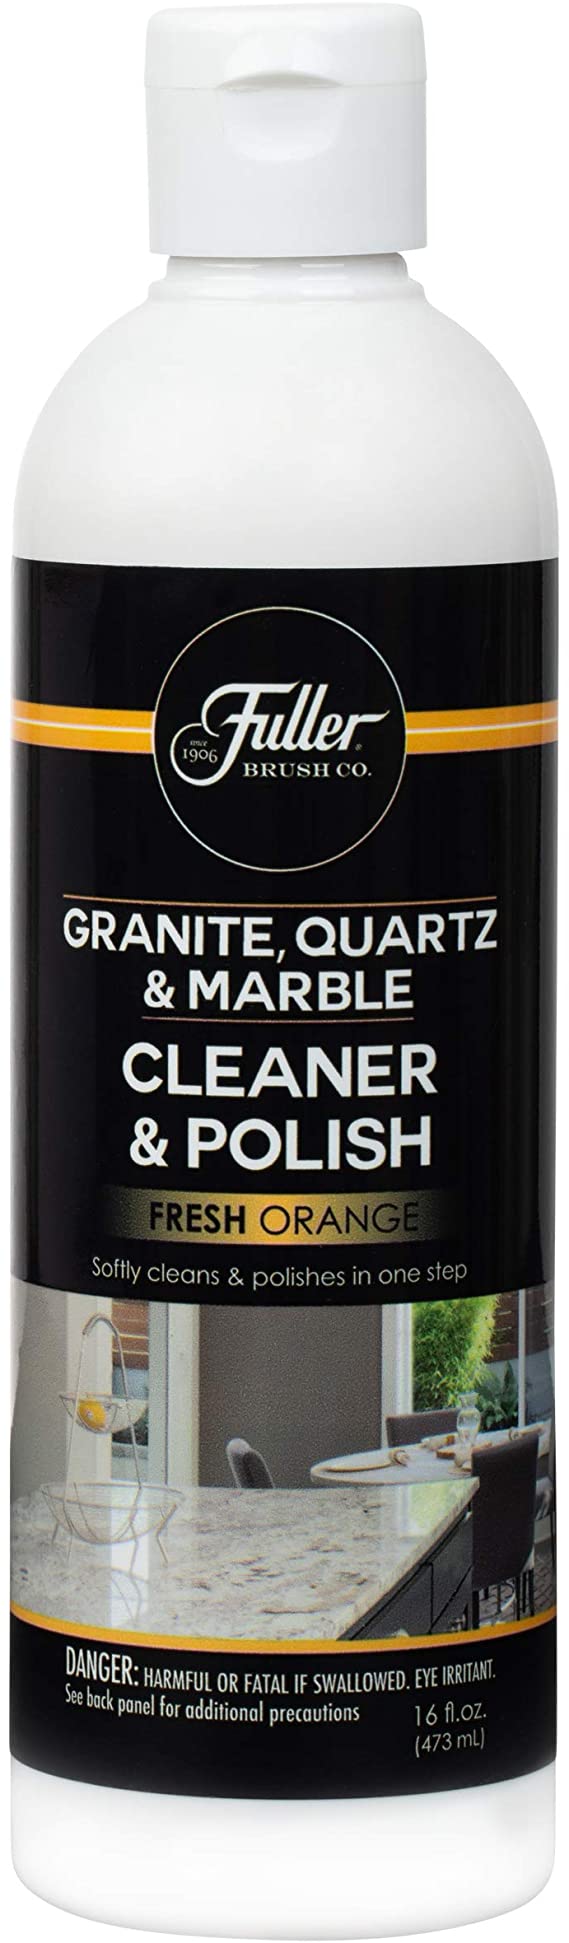 Fuller Brush Countertop Cleaner & Polish - Cleans and Protects Granite, Quartz, Marble, Plastic, Laminates, Ceramic Tile, Shiny Metal & Glass - One Step Clean & Protectant Seal on Surface